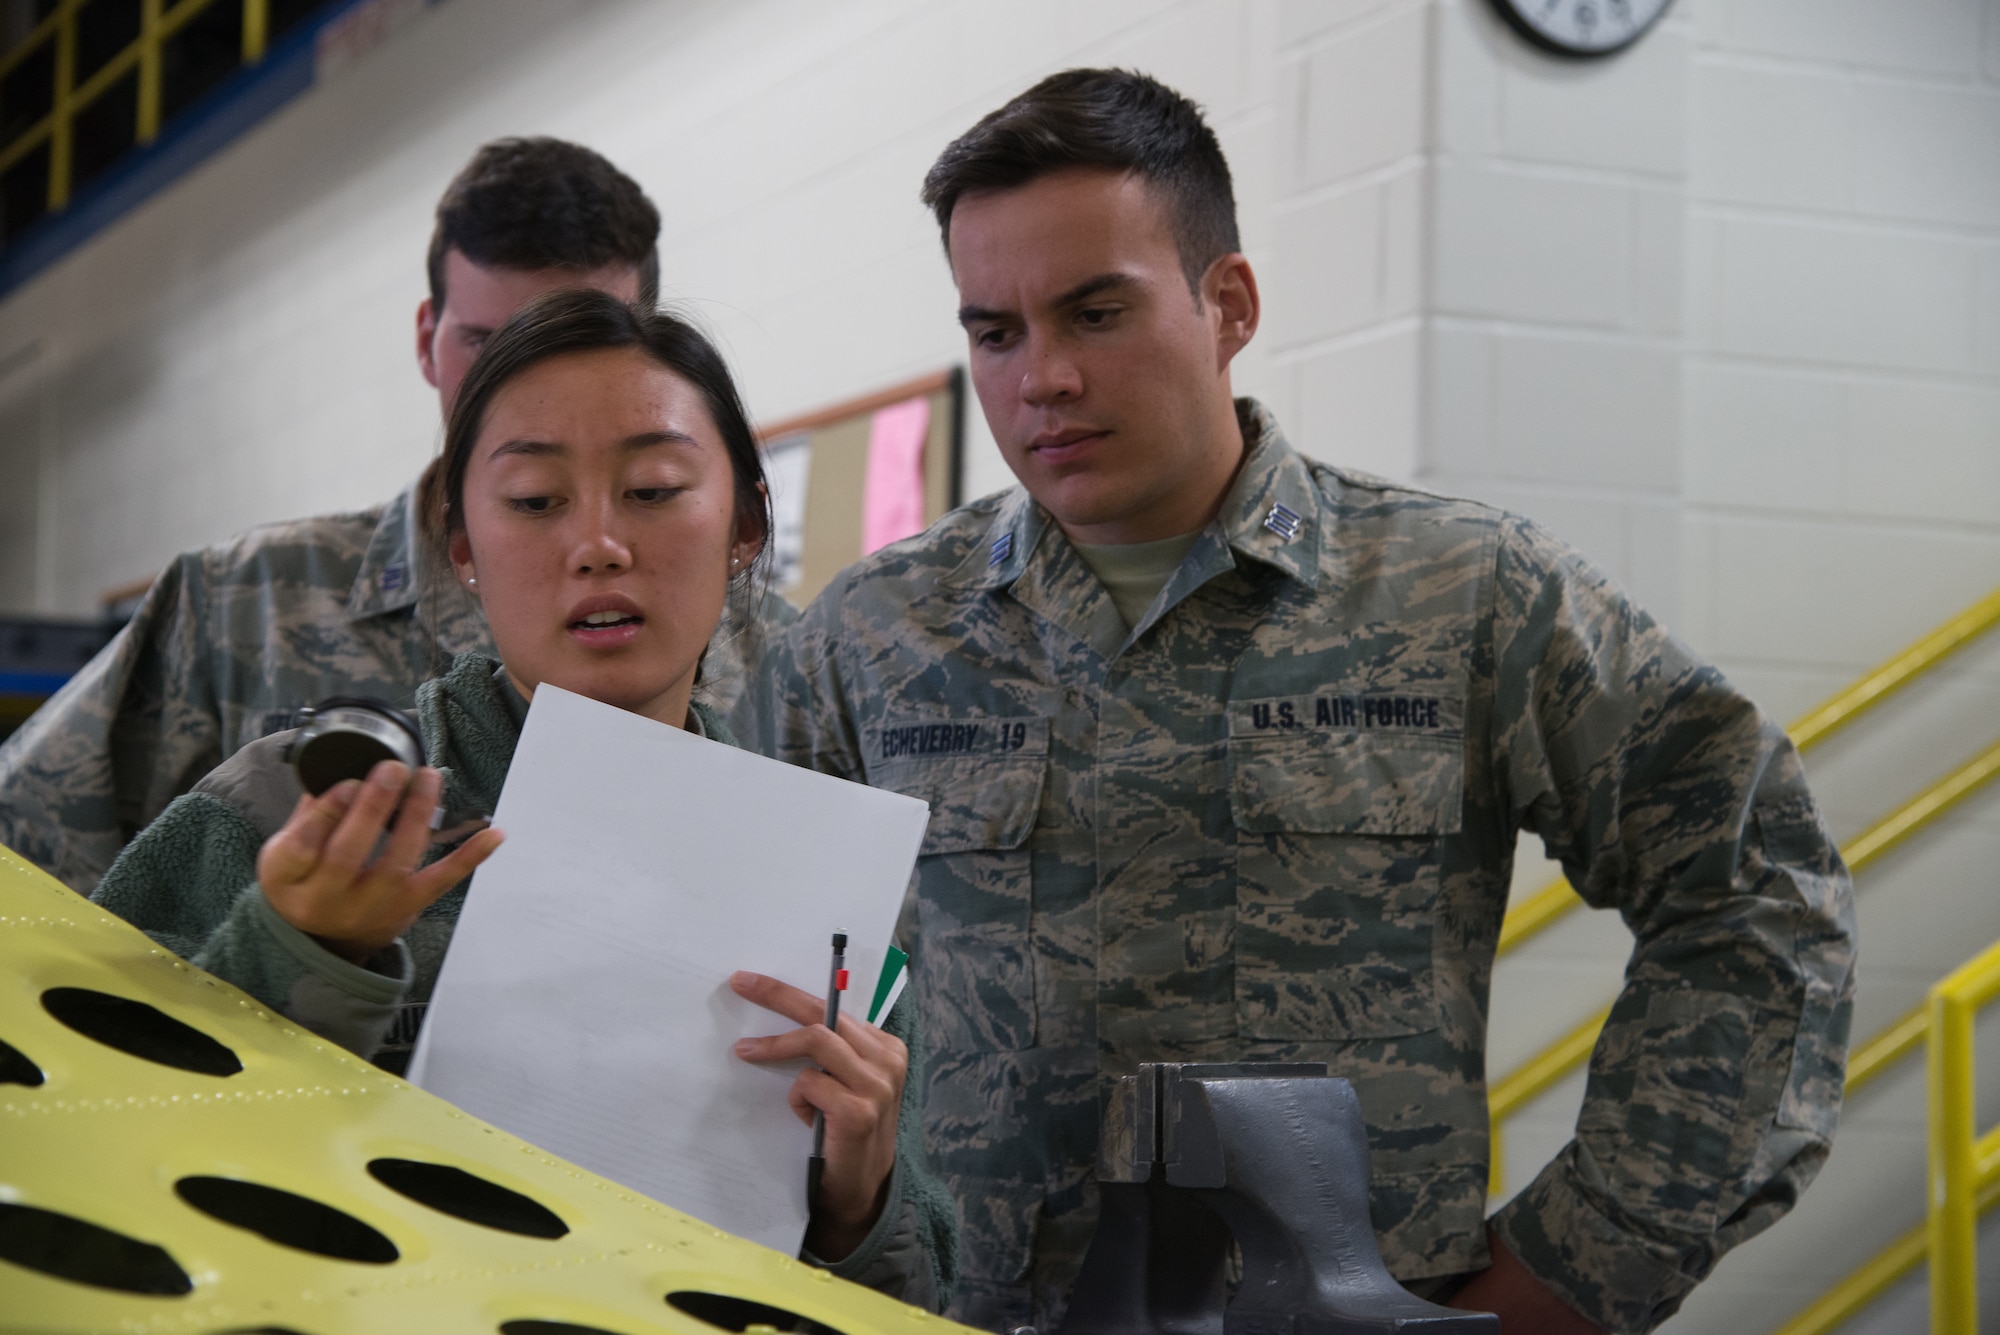 Cadets Mai-Lin Quinto and Lucas Echeverry, from the U.S. Air Force Academy, Colorado, inspect a tool designed to measure the depth of corroded pits on aircraft metals Oct. 23, 2018, at Peterson Air Force Base, Colorado.